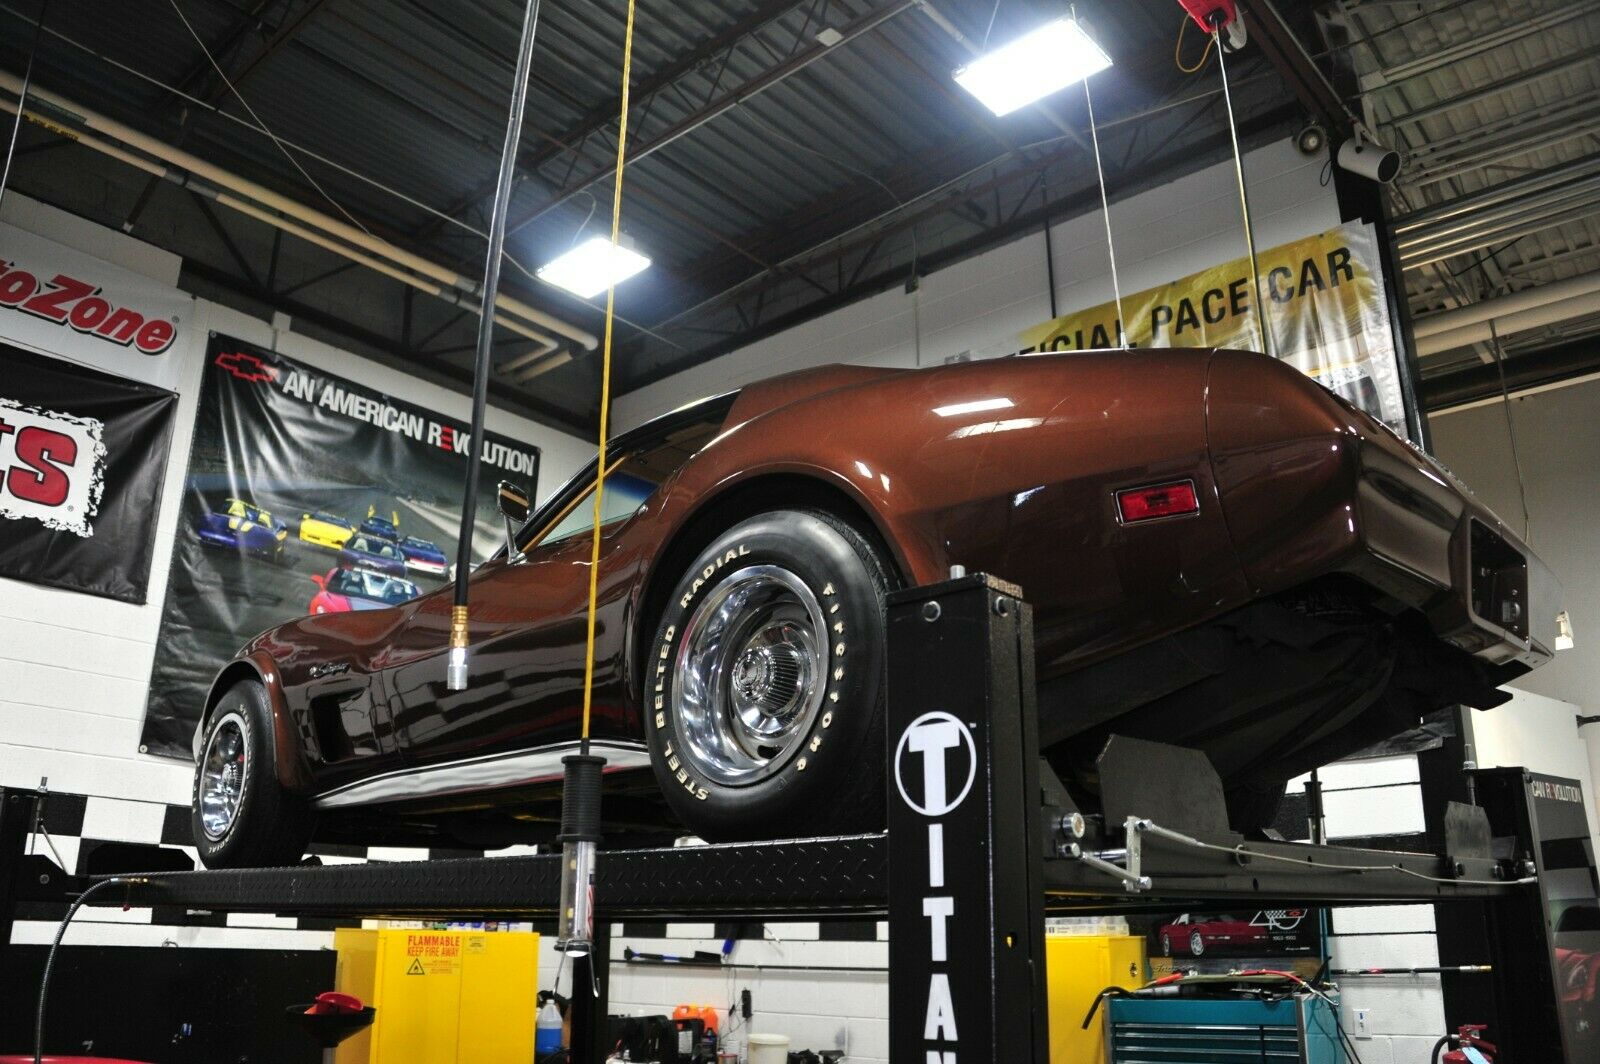 This one-owner 1974 Corvette is currently being auctioned by the NCM to raise money for future exhibits at the Museum!